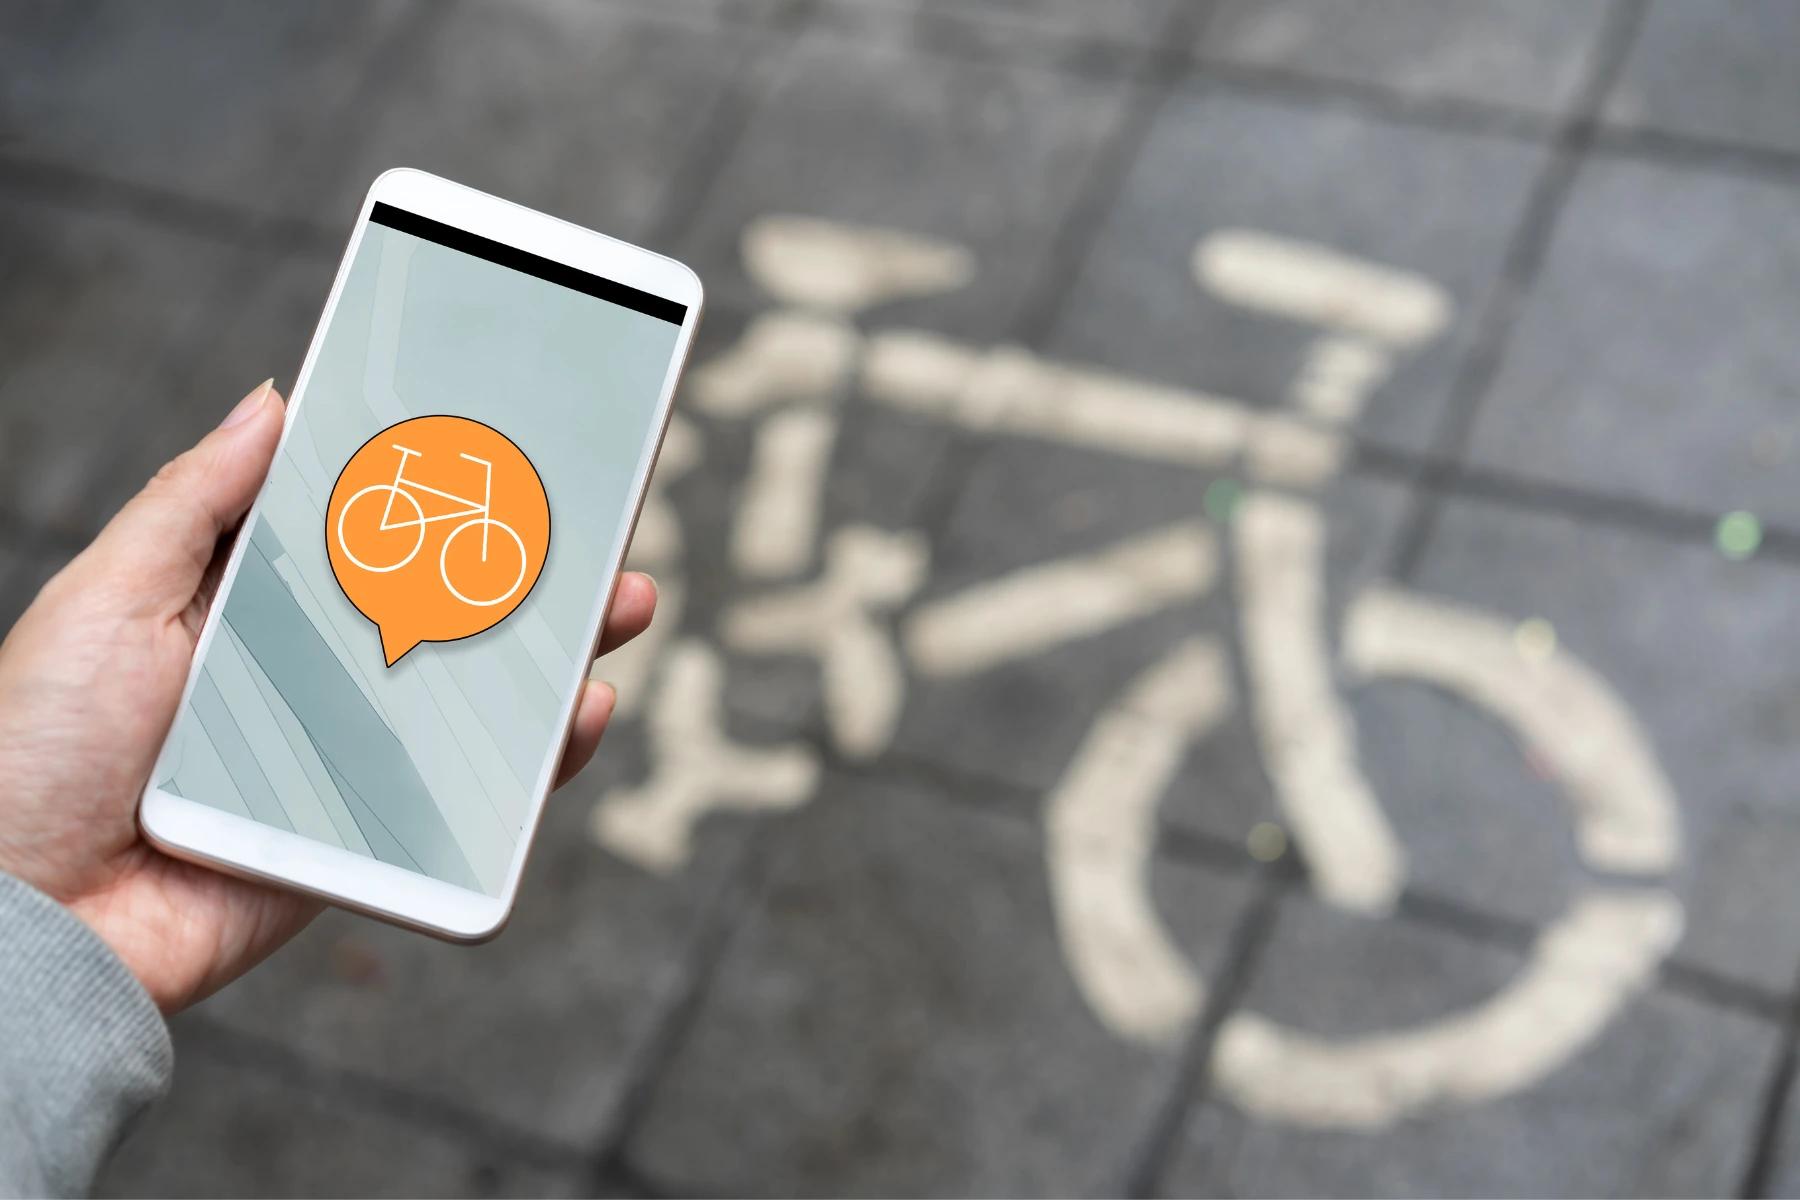 Find shared bikes nearby.